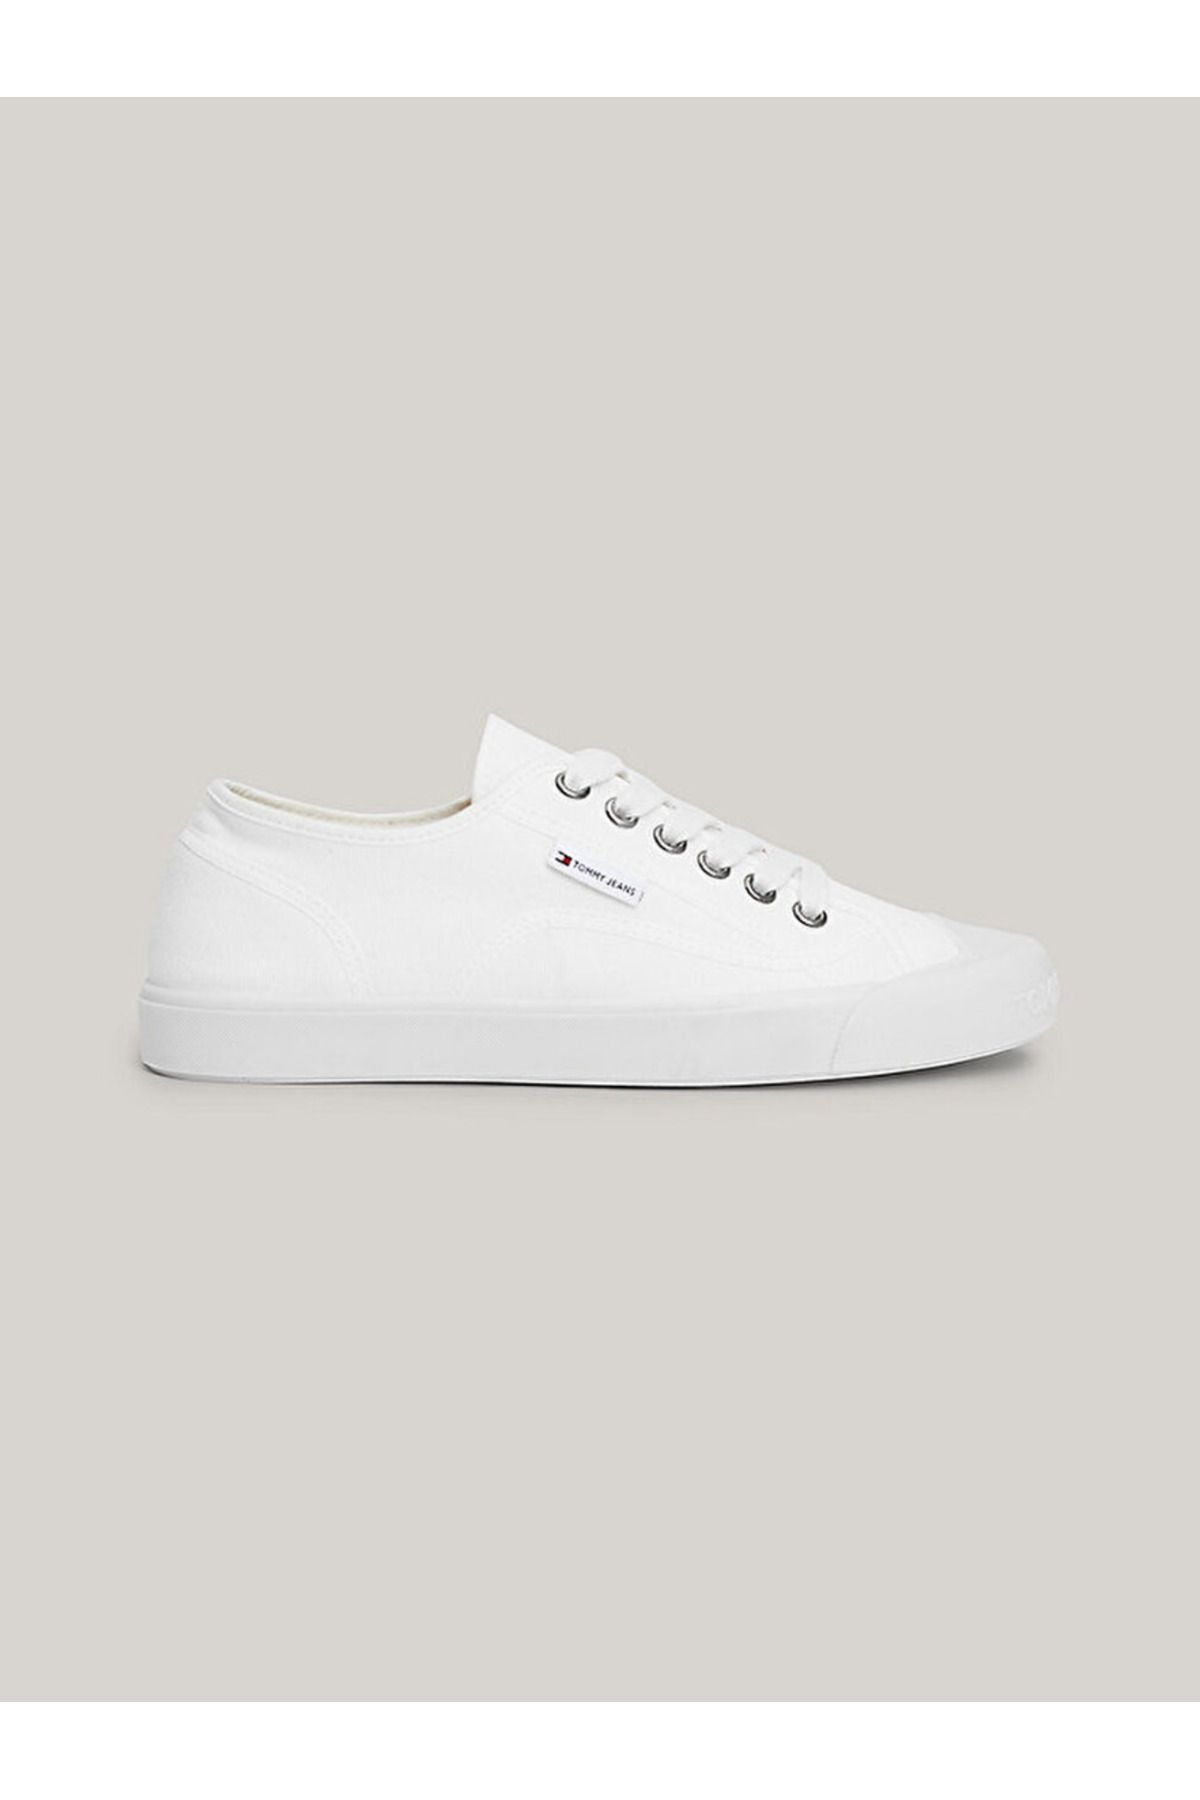 Tommy Hilfiger Flexible Sole Canvas Trainers